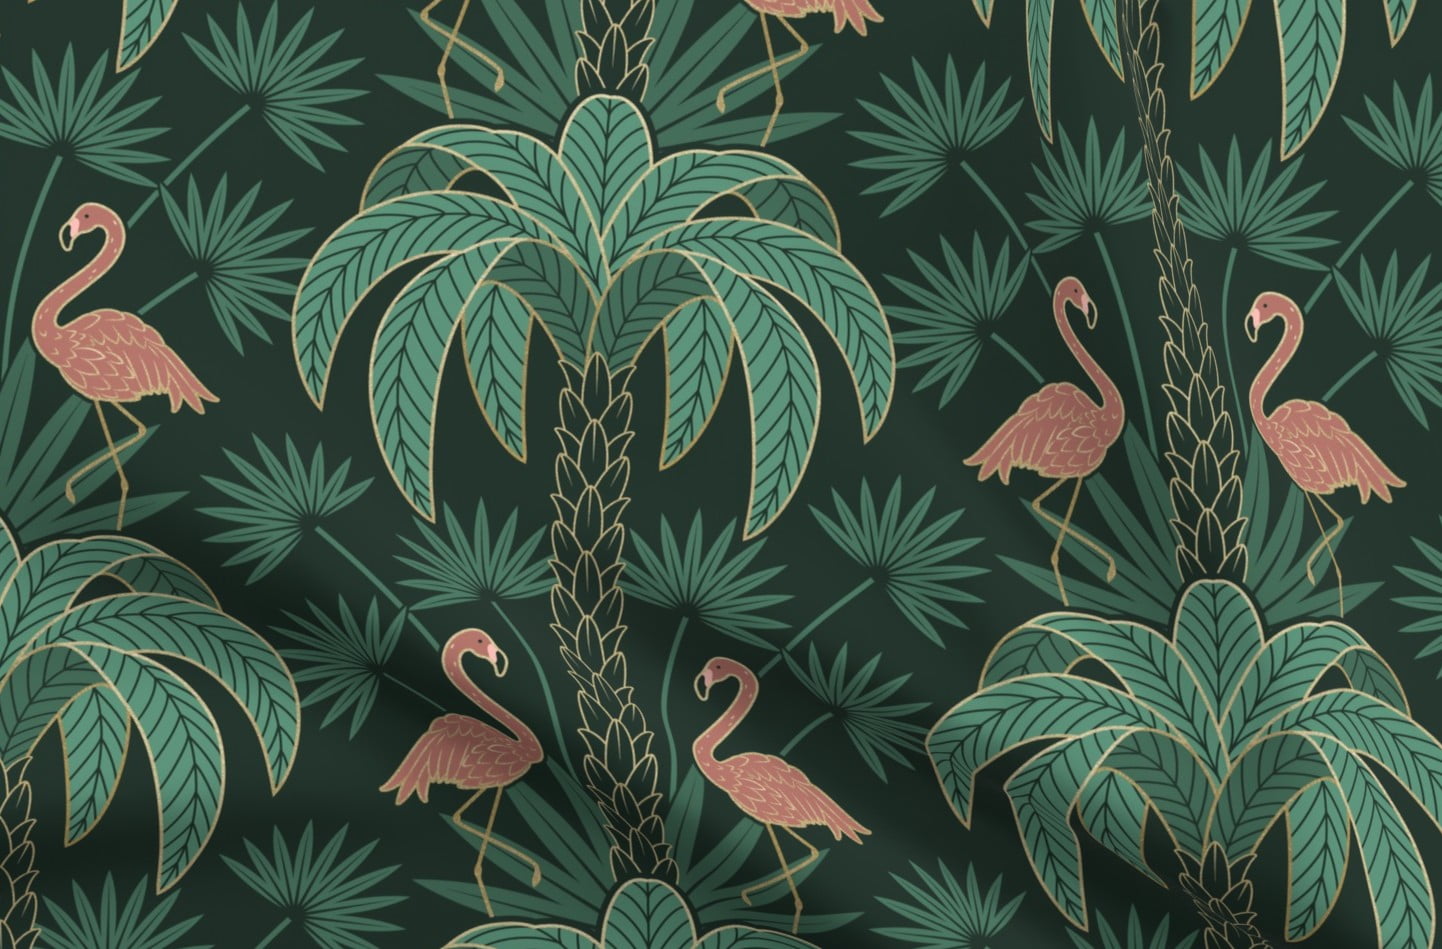 Spoonflower Fabric - Palm Leaves Sky Blue Tropical Green Watercolor Jungle  Light Printed on Upholstery Velvet Fabric Fat Quarter - Upholstery Home  Decor Bottomweight Apparel 